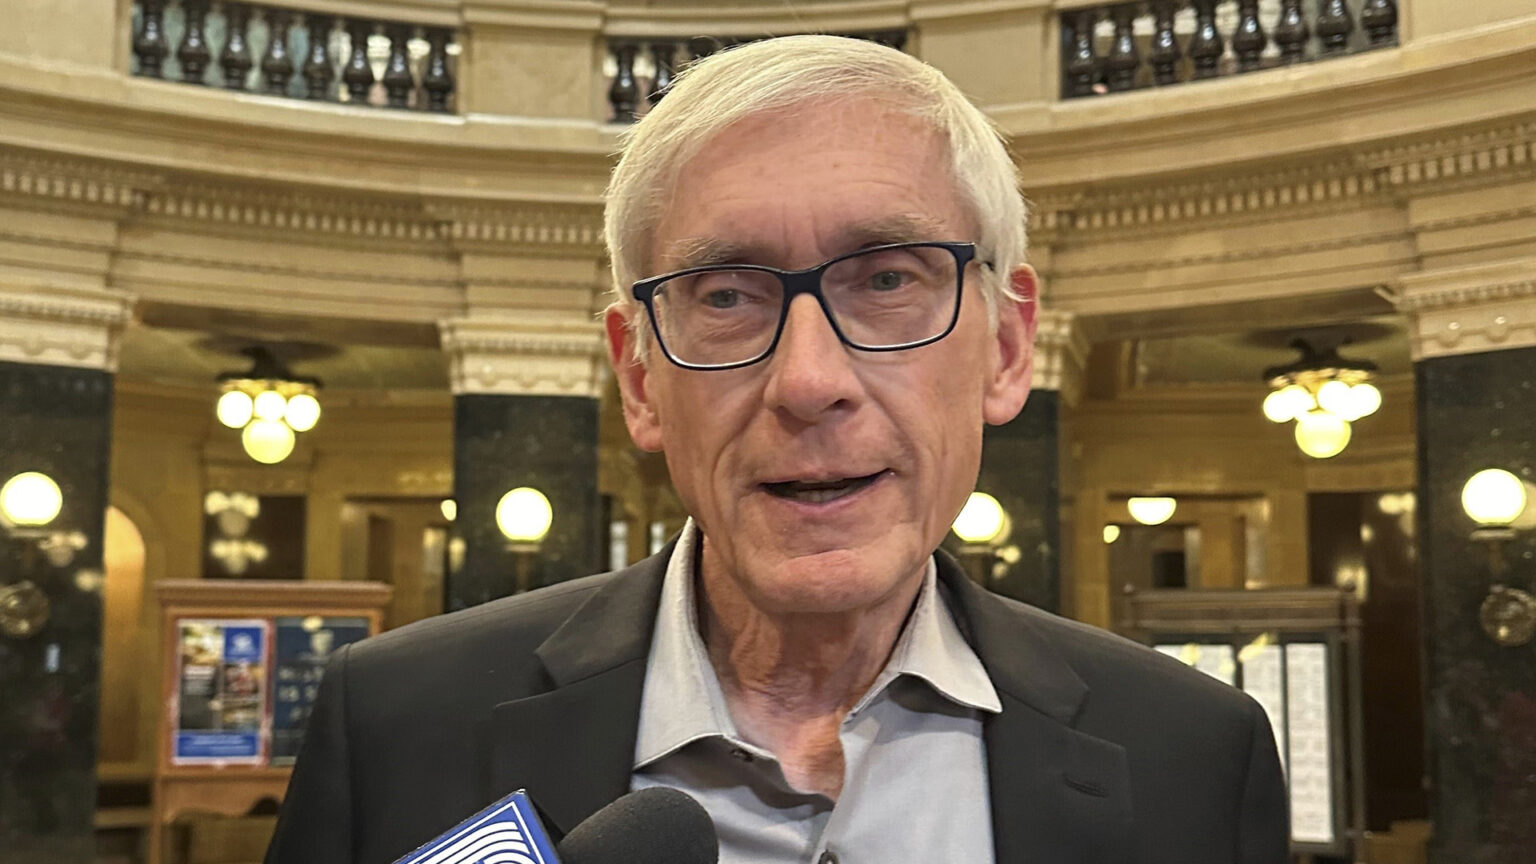 Tony Evers speaks into a hand-held microphone while standing in a room with square marble pillars framing a circular space with a marble balustrade on a second level, with numerous brass-mounted lights on the pillars, walls and ceiling.